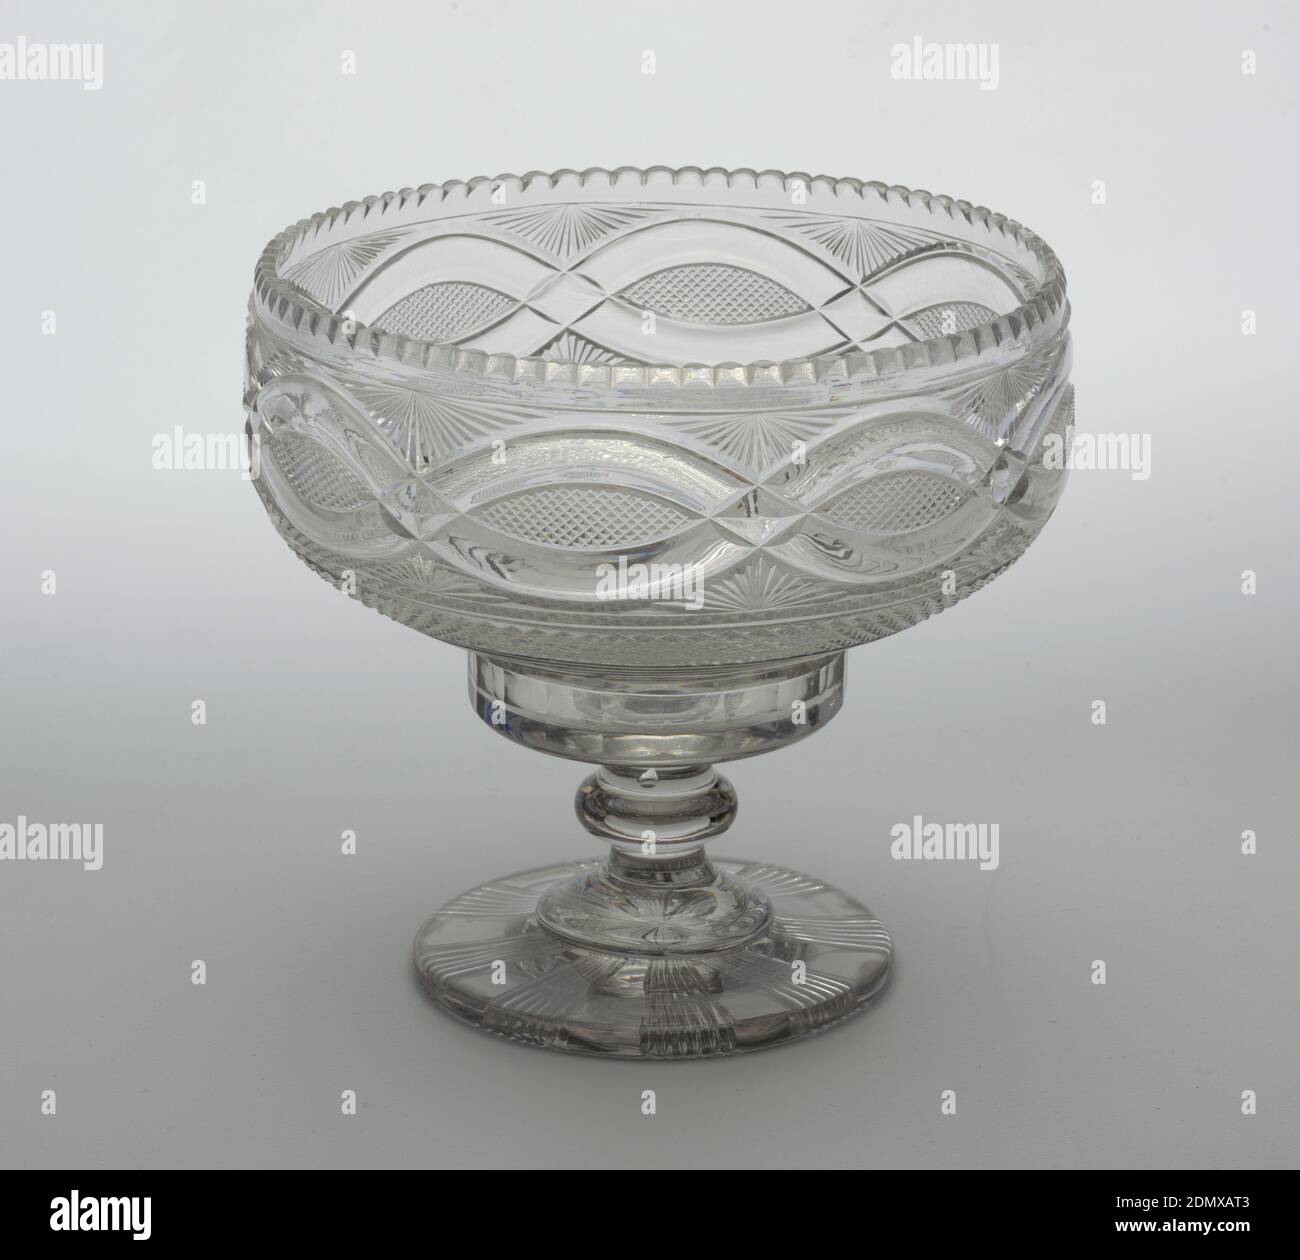 Bowl, Glass, Drum-shaped bowl with scalloped edge, the base tapering to a flat bottom, tall stem with central knop, wide flat circular base cut on the bottom with raised flutes; sides of bowl cut with facets at the bottom, bands of prismatic cutting and small diamonds above, a wide band of interlocking loops surrounded by small diamonds and fan cutting., Ireland, ca. 1820, glasswares, Decorative Arts, Bowl Stock Photo